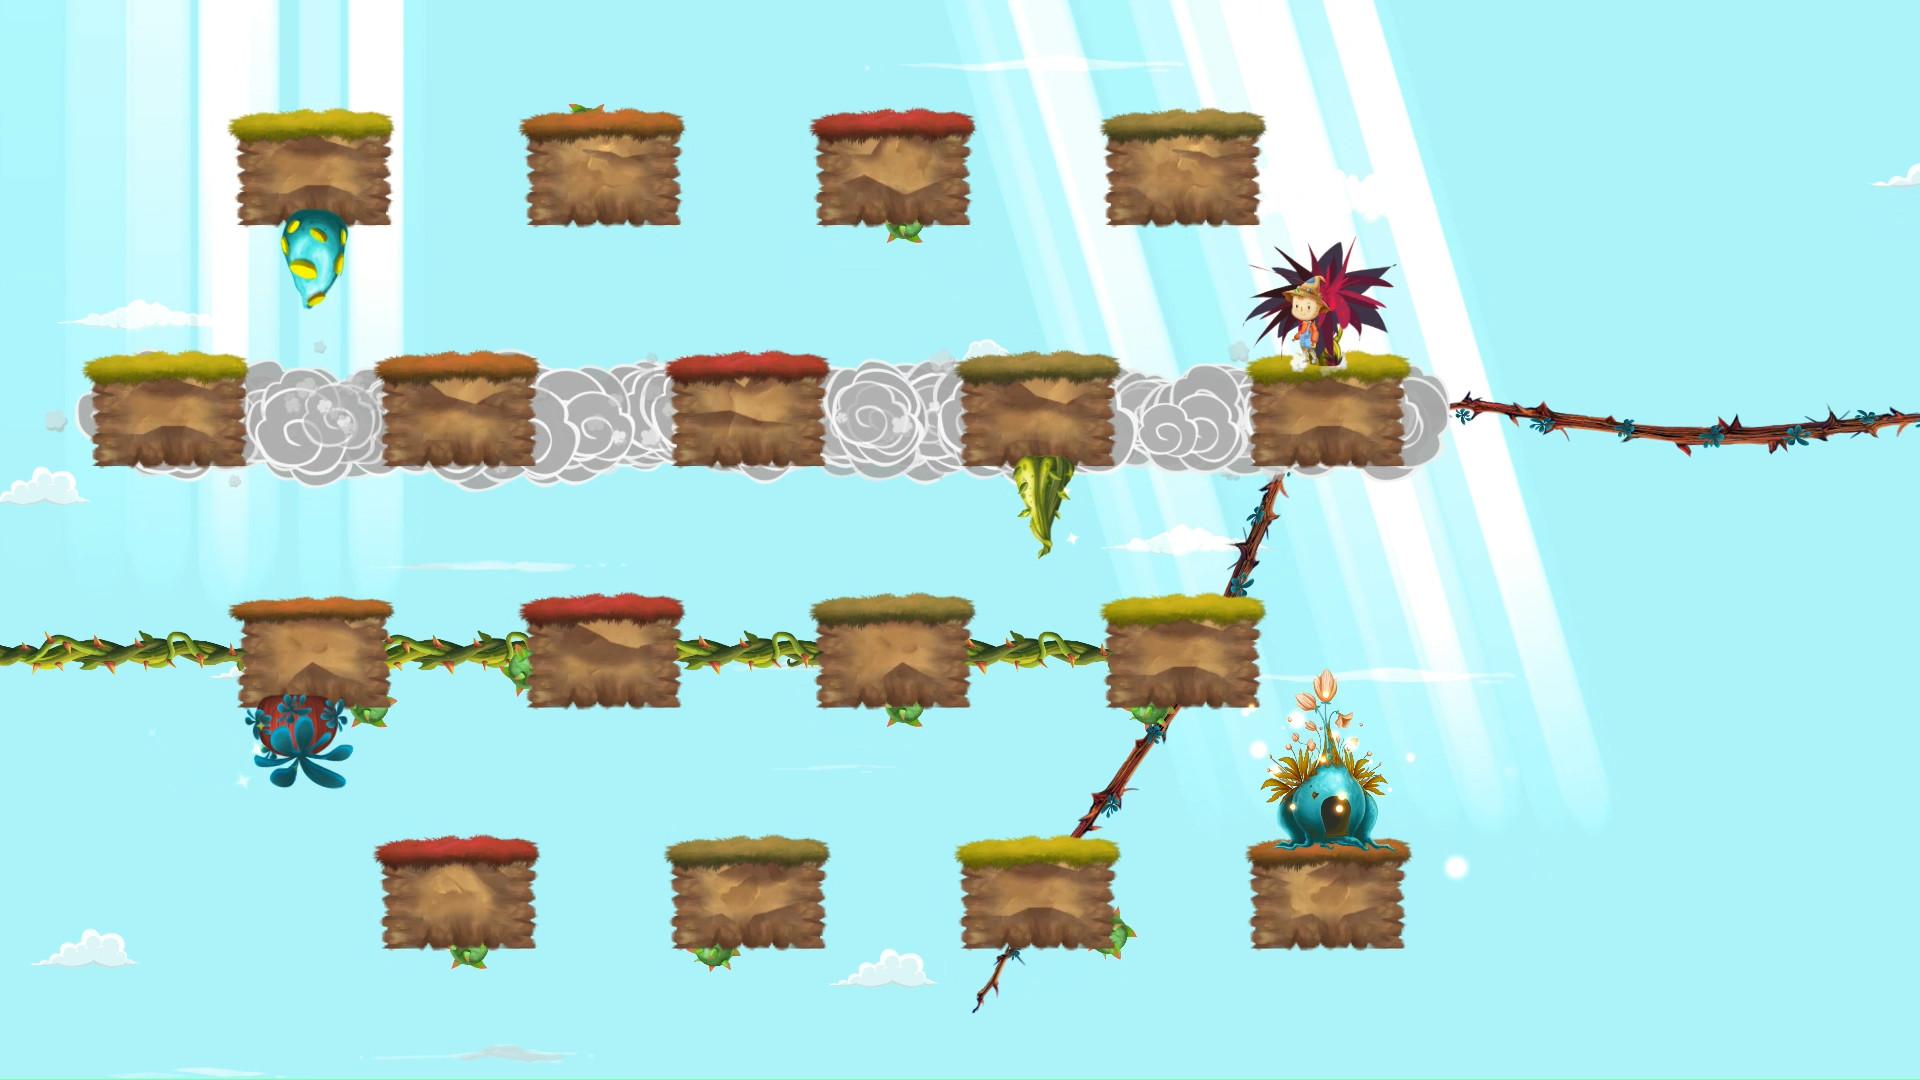 Screenshot №3 from game Upside Down